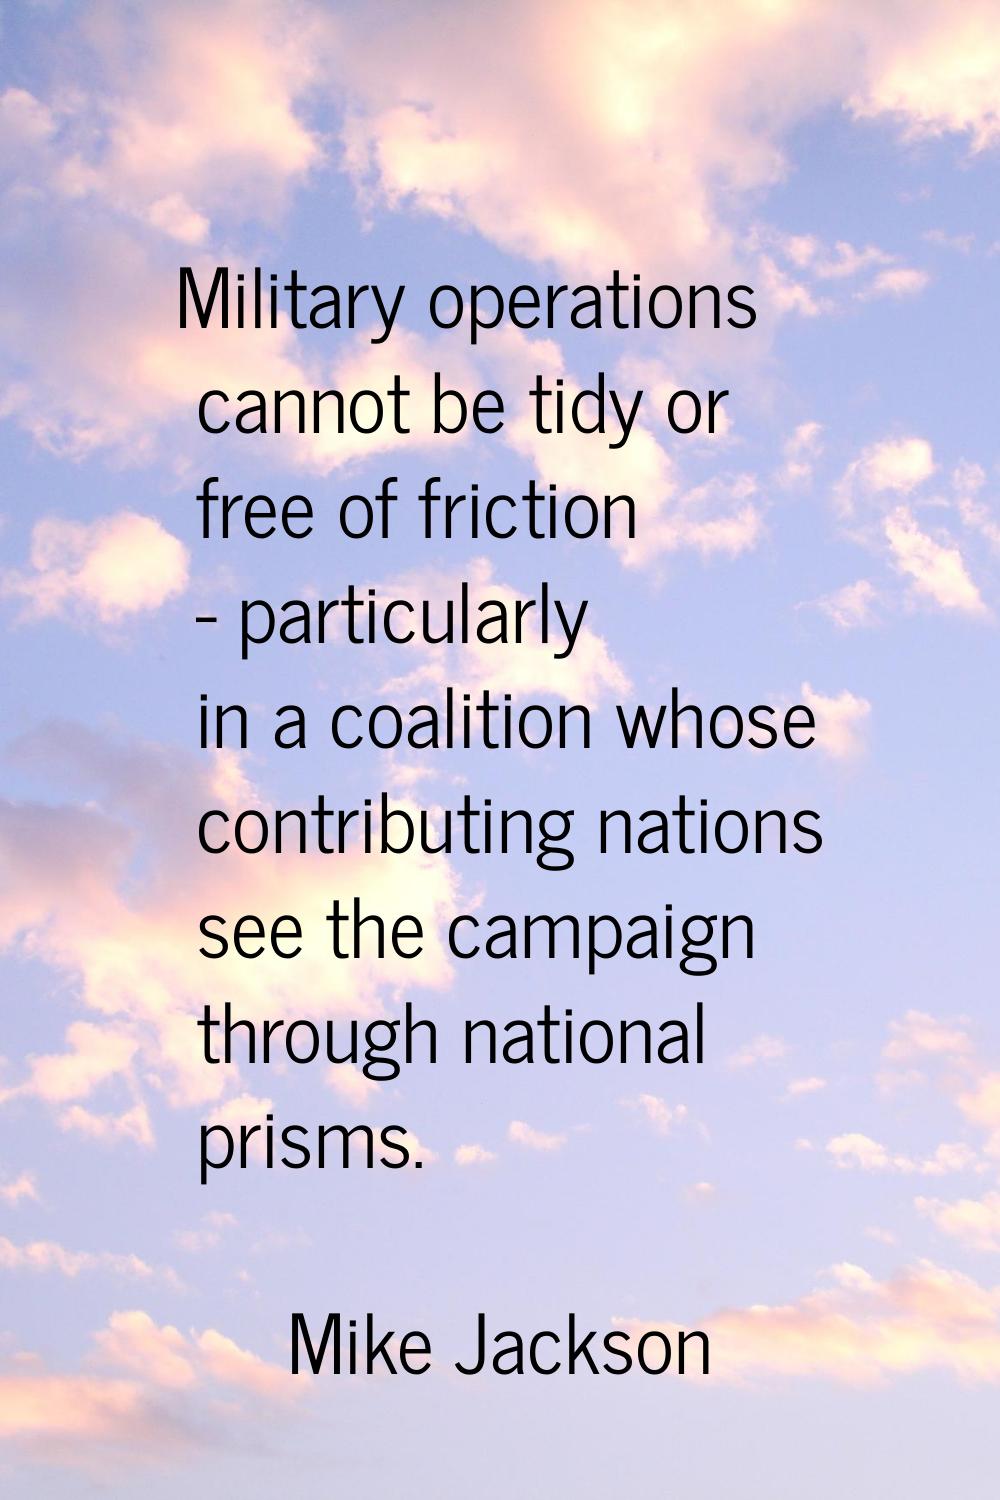 Military operations cannot be tidy or free of friction - particularly in a coalition whose contribu